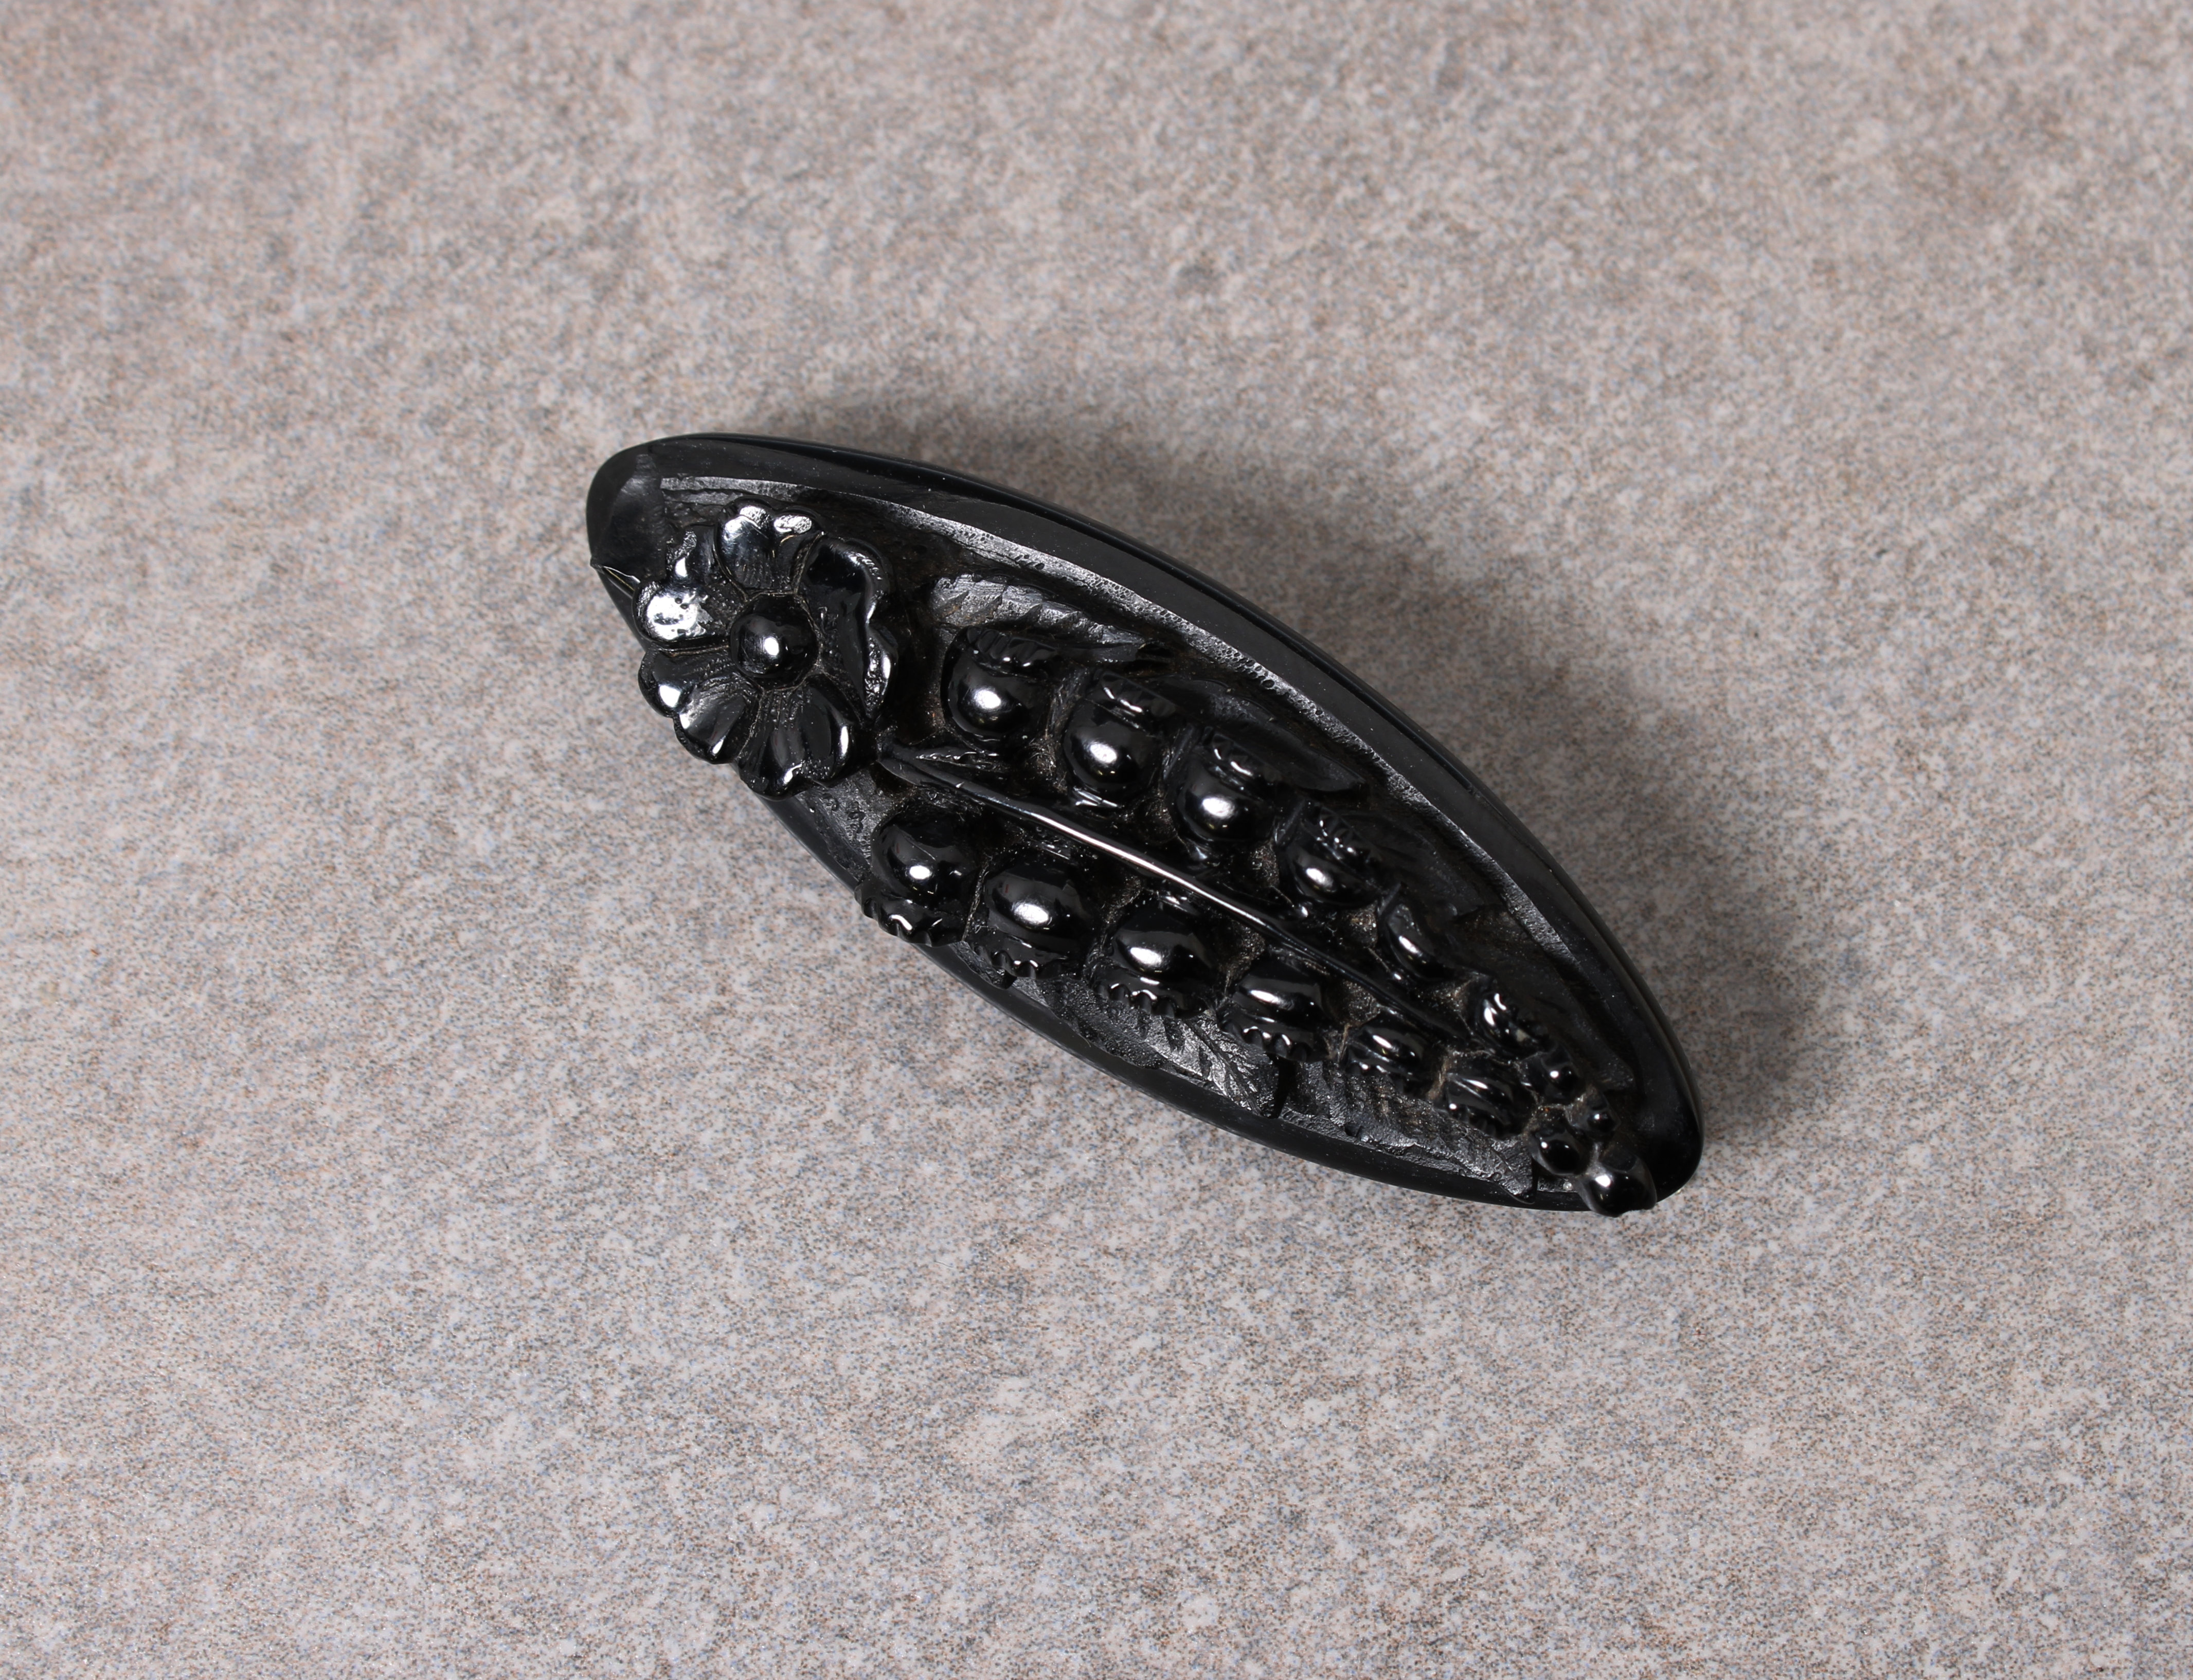 A Victorian mourning brooch